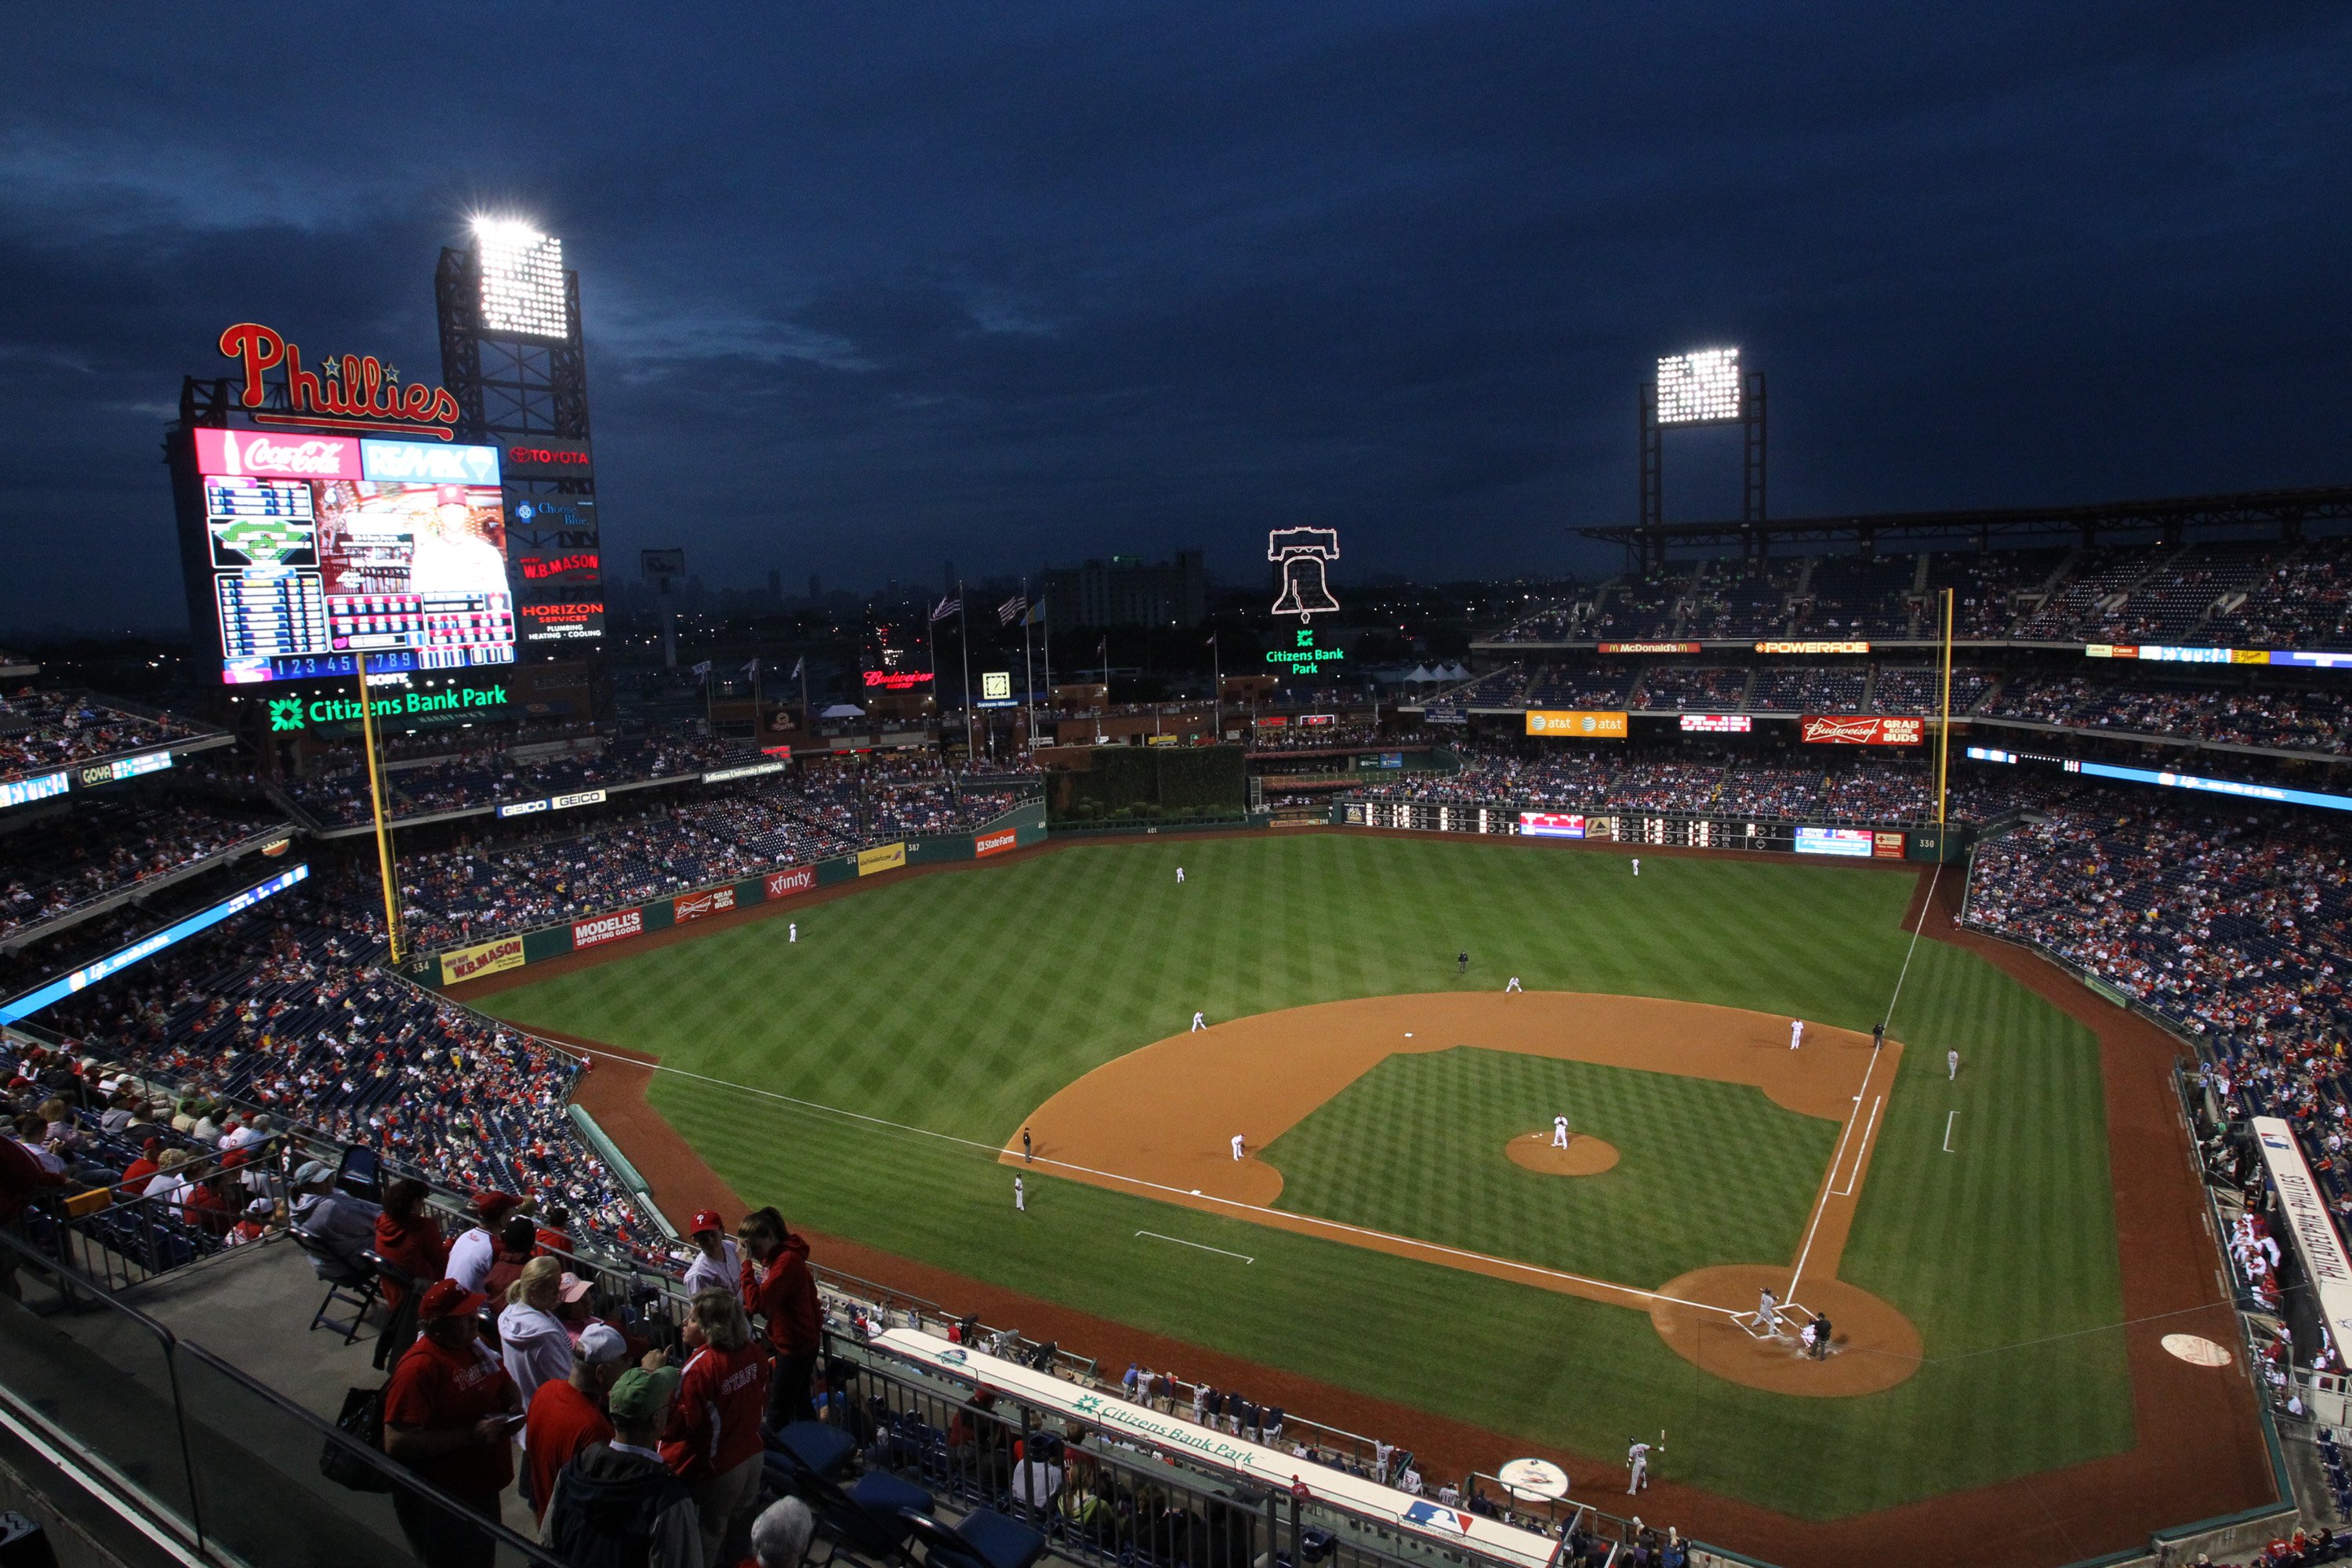 Displaying 16 Images For   Citizens Bank Park Wallpaper